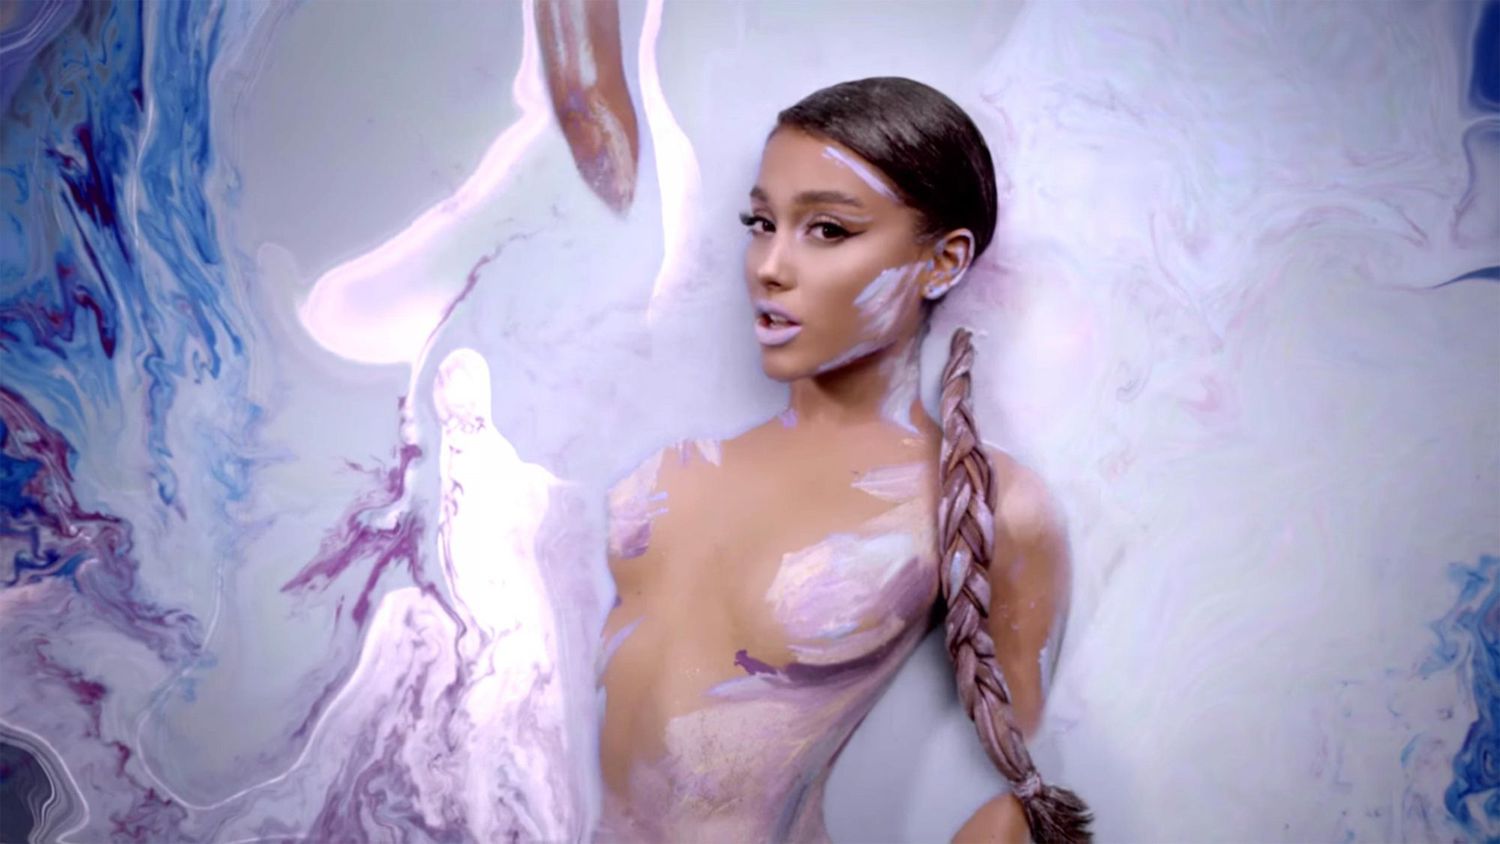 brandon stutz recommends ariana grande showing boobs pic